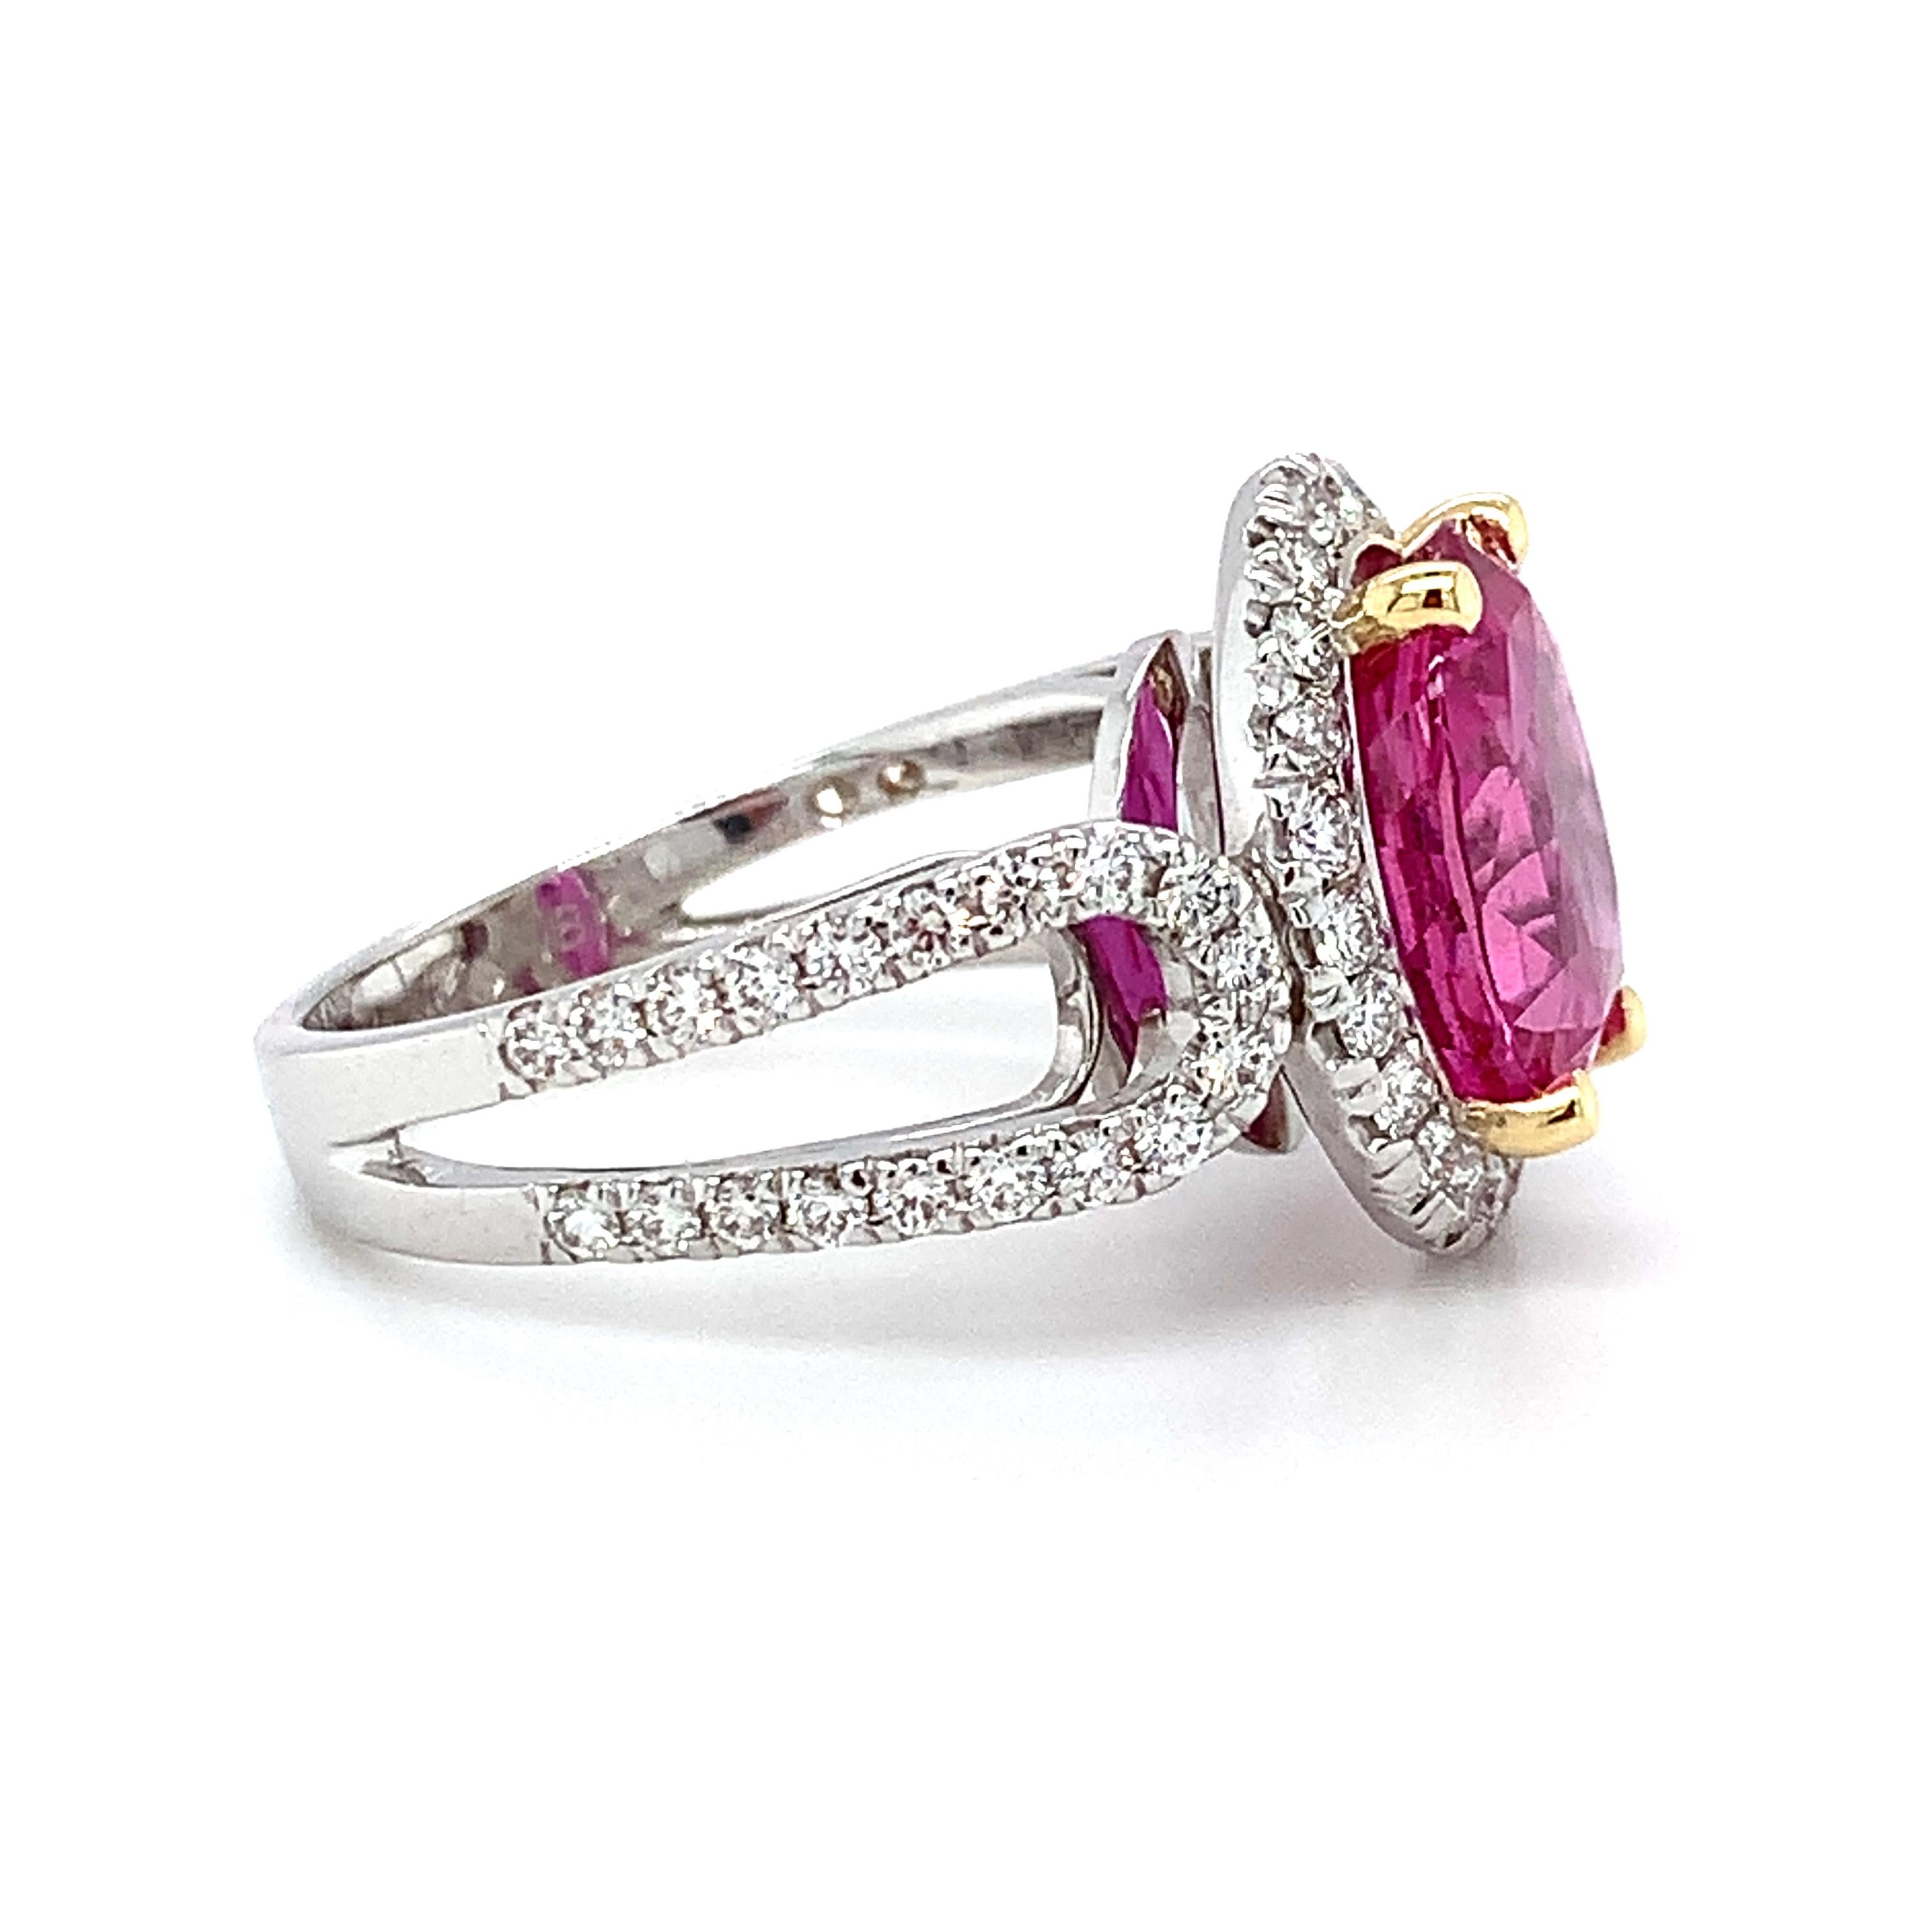 GIA Certified Unheated 5.73 Carat Pink Sapphire and Diamond Cocktail Ring For Sale 1